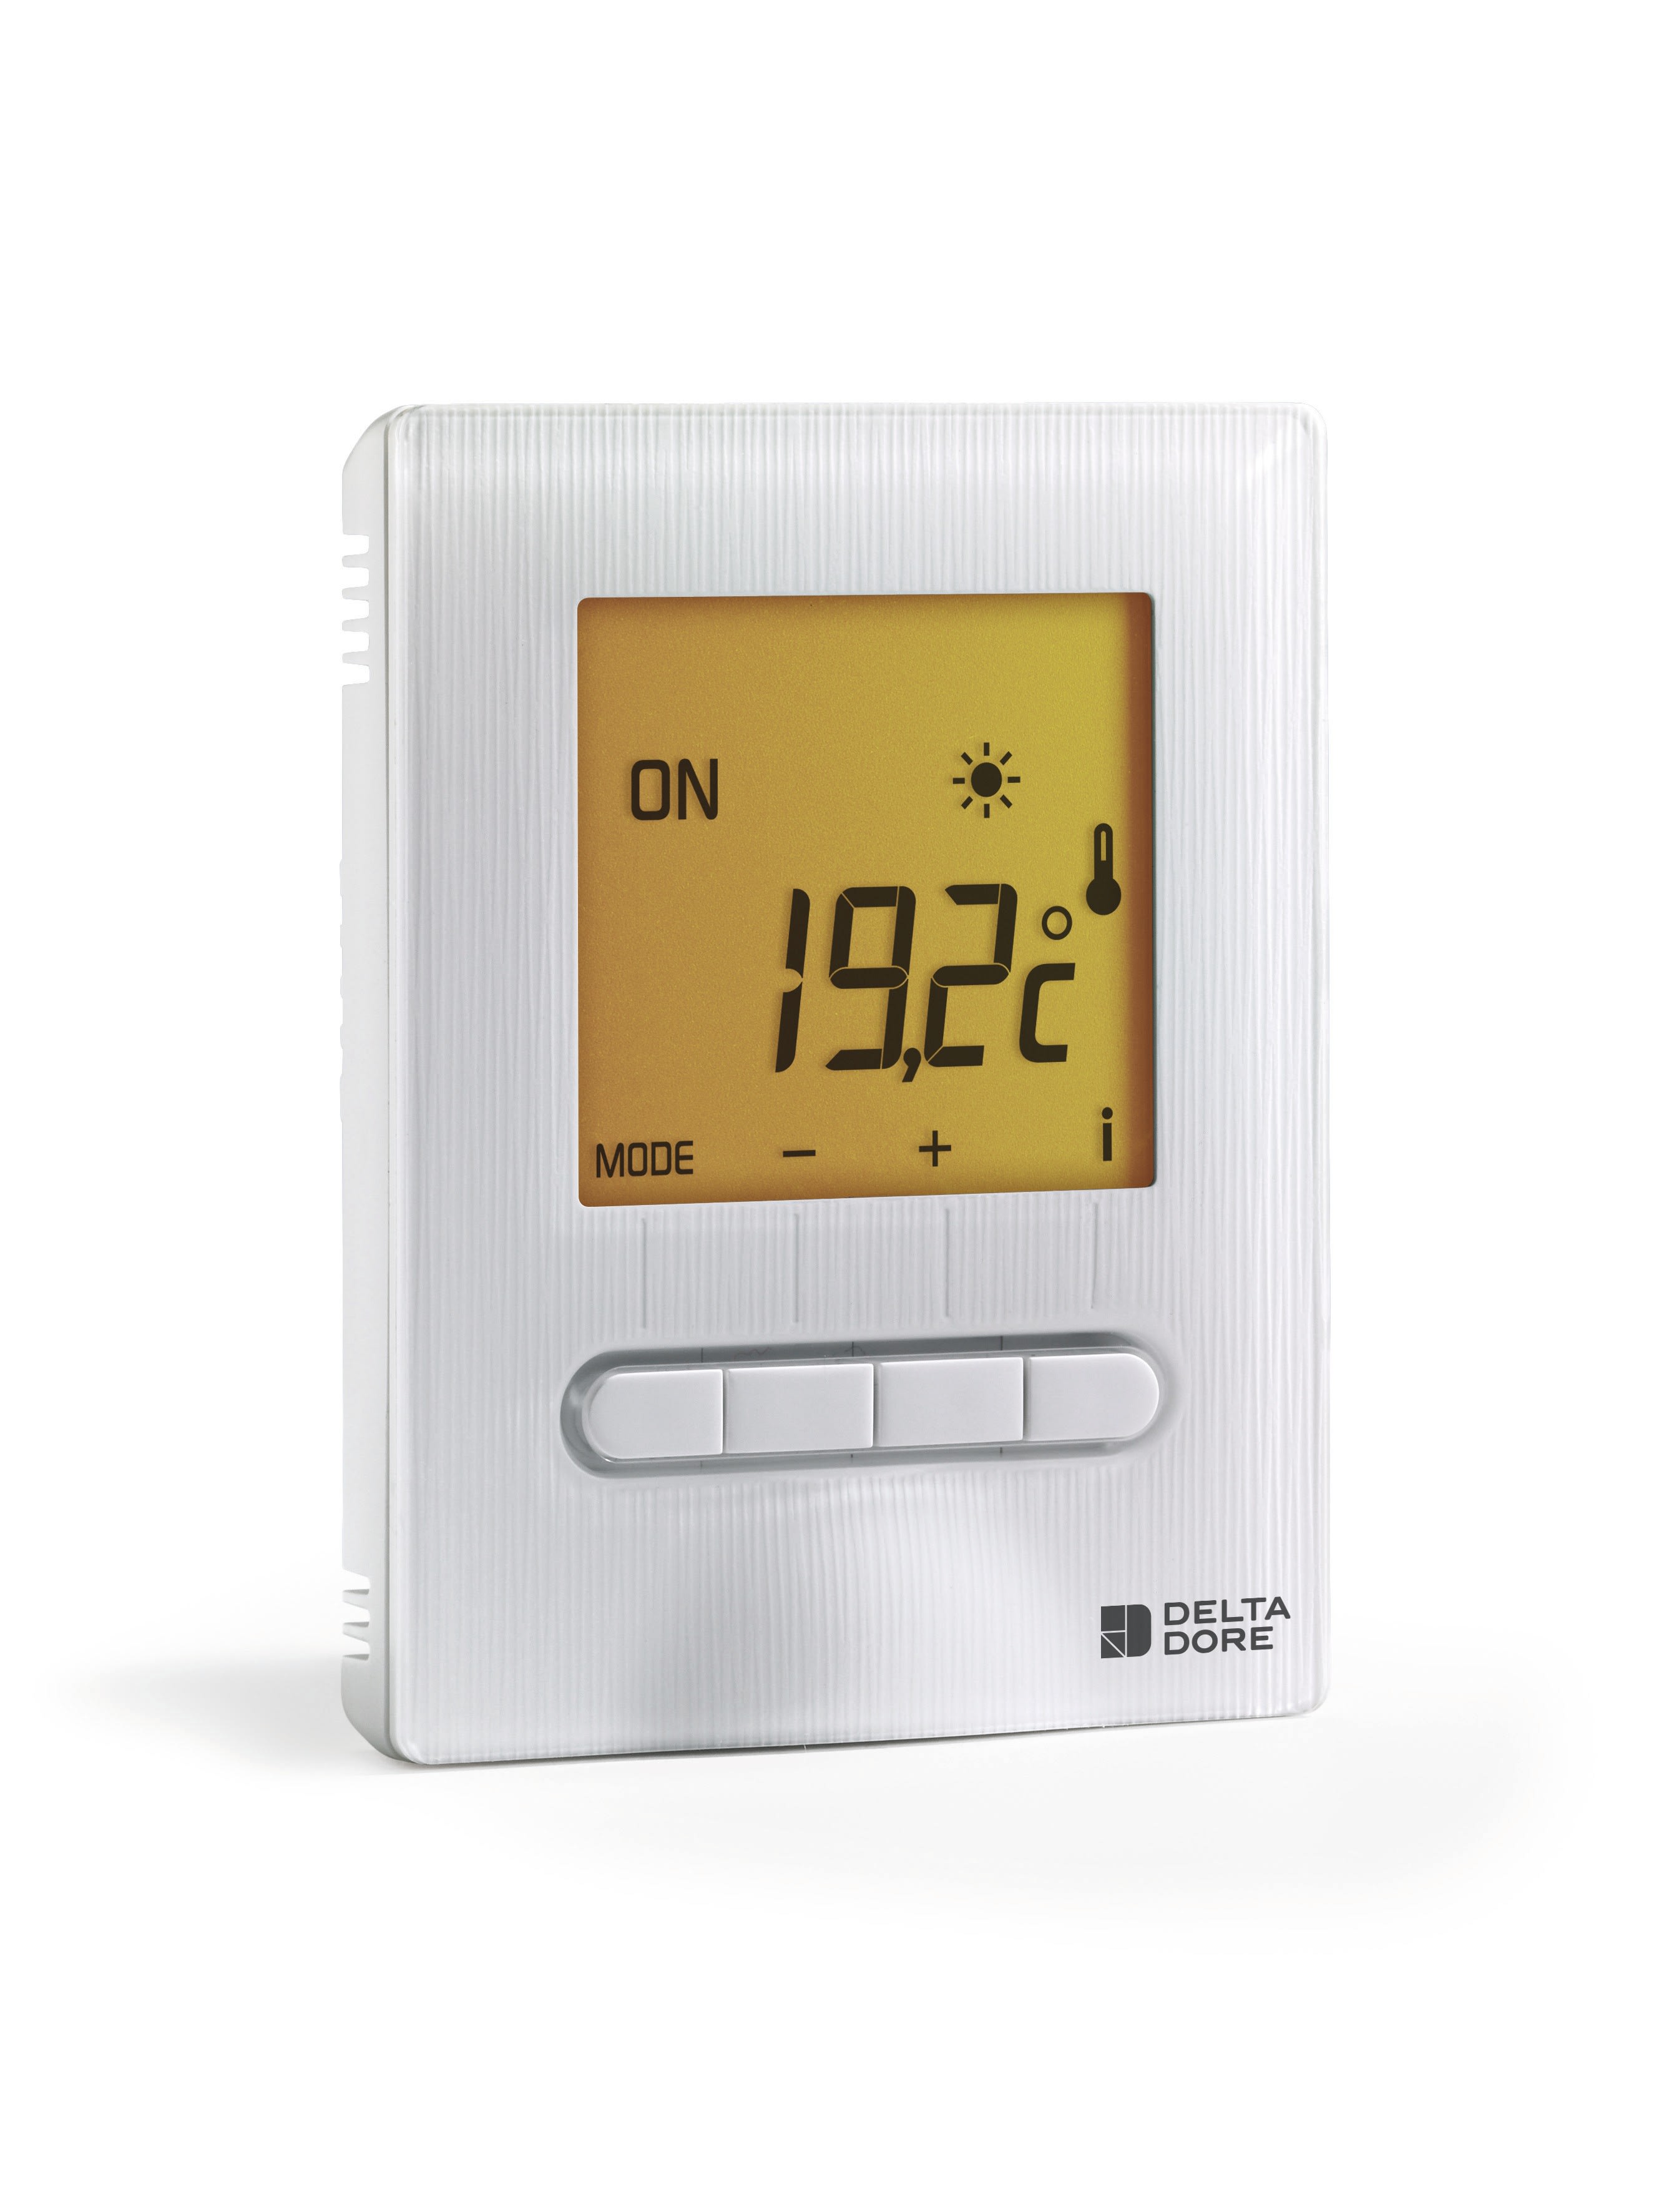 THERMOSTAT D'AMBIANCE Equip'Horse